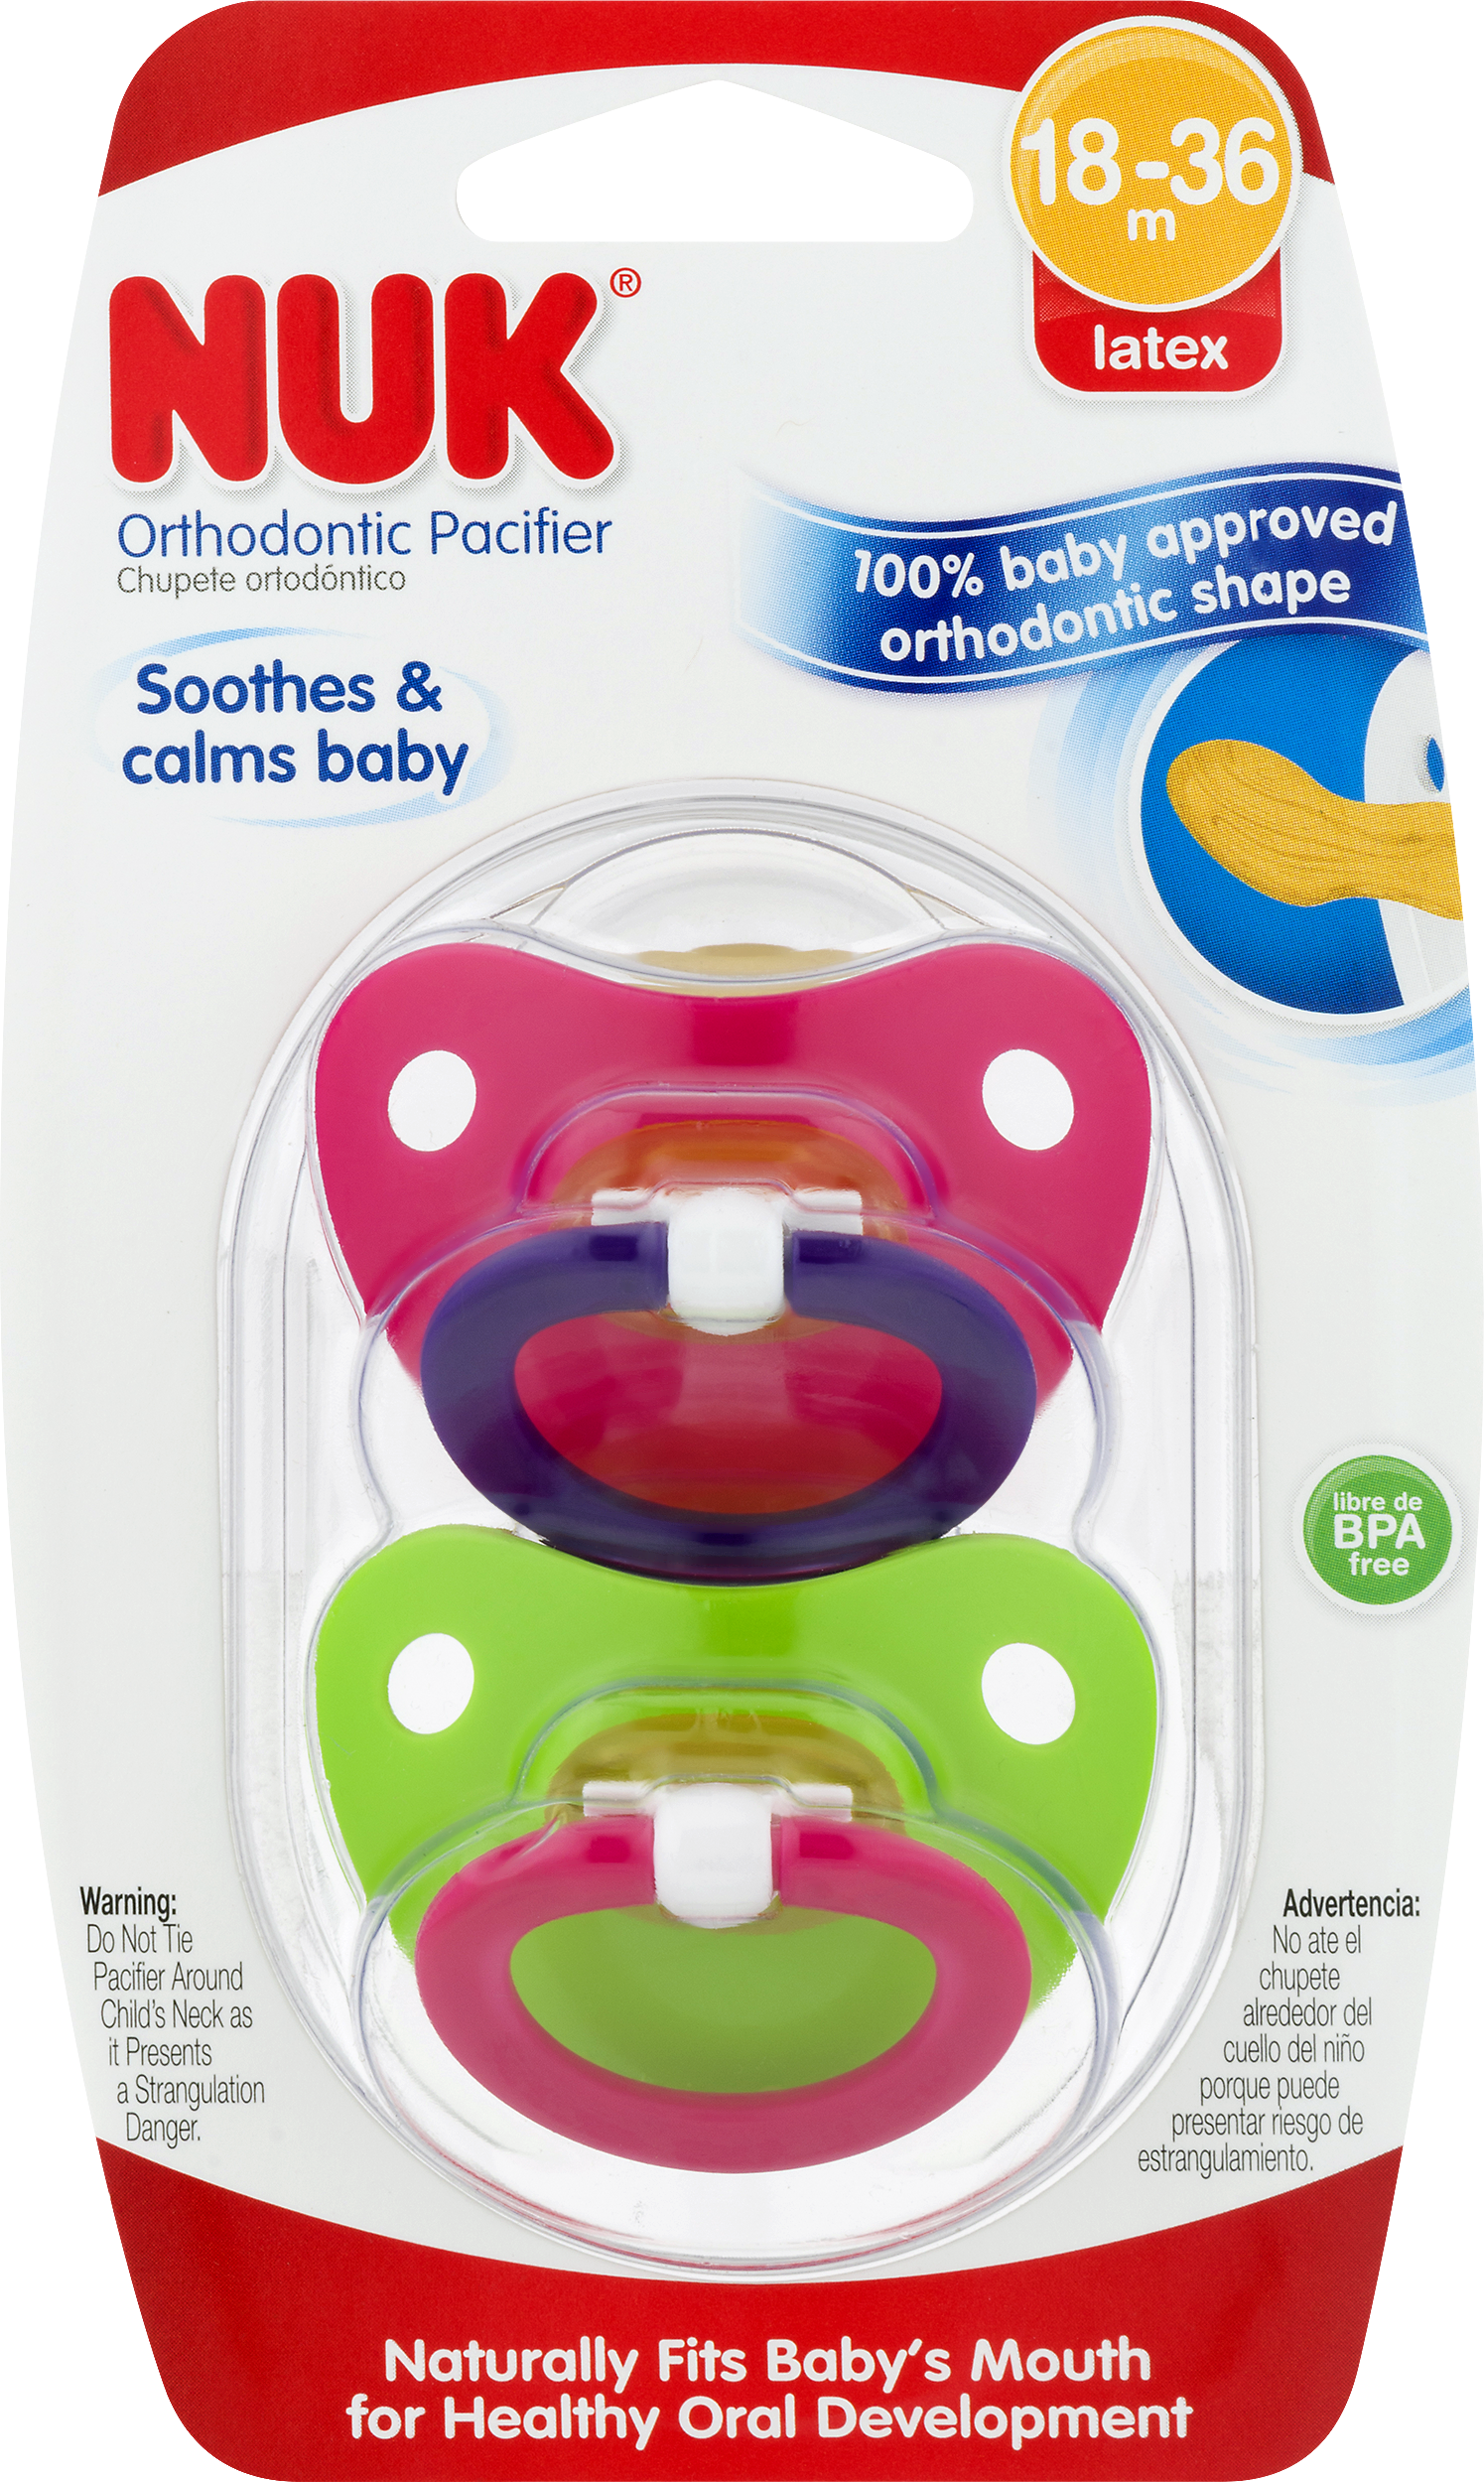 Nuk orthodontic months counts. Pacifier clipart gerber baby